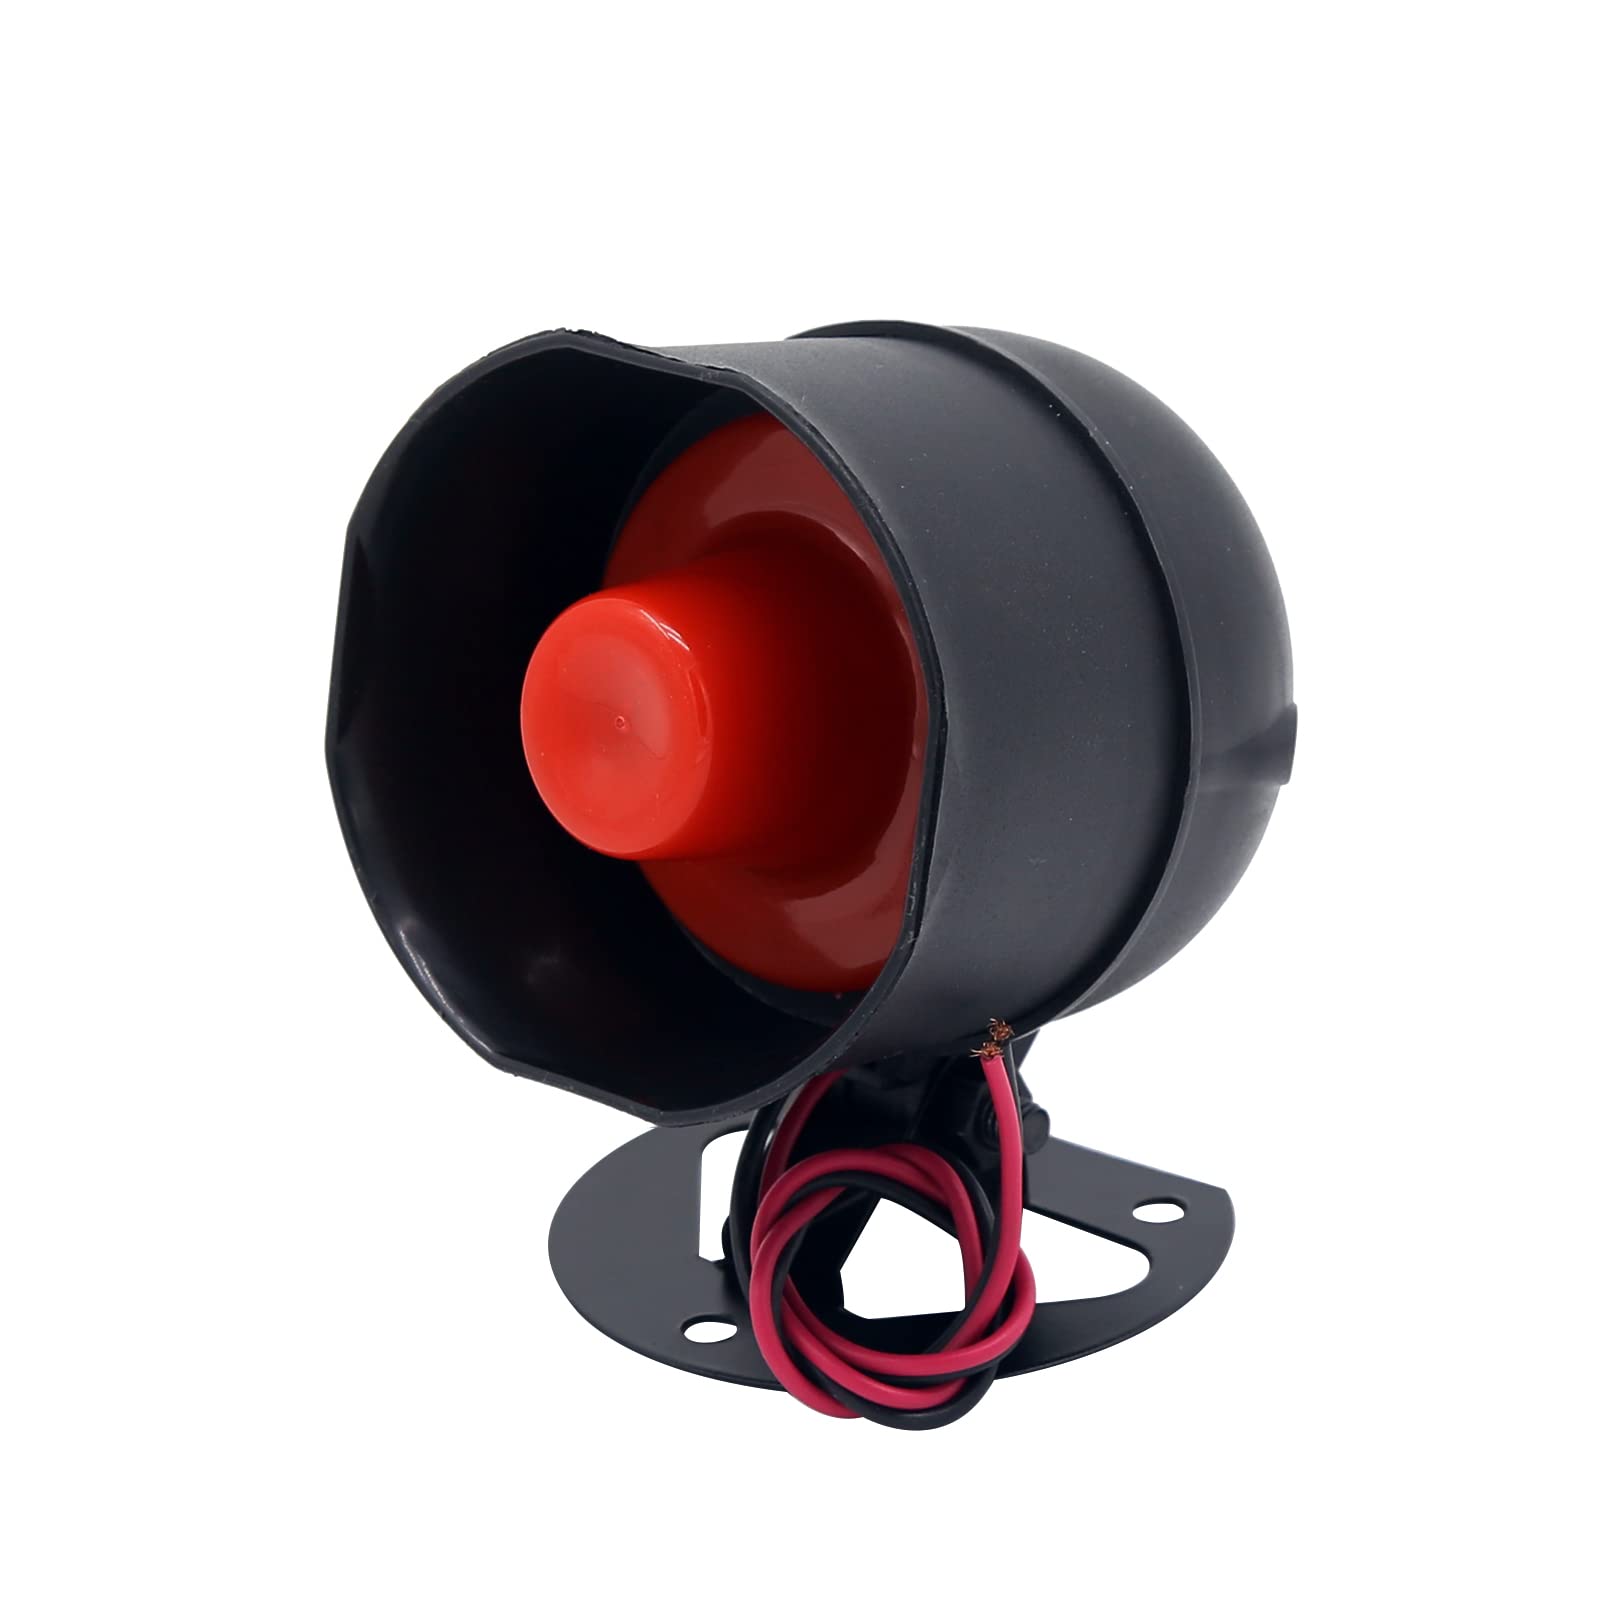 ERYUE Car Alarm Vehicle System Anti-Theft Horn 12V 105dB Alarm Siren Horn for Car Motorcycle Scooter von ERYUE